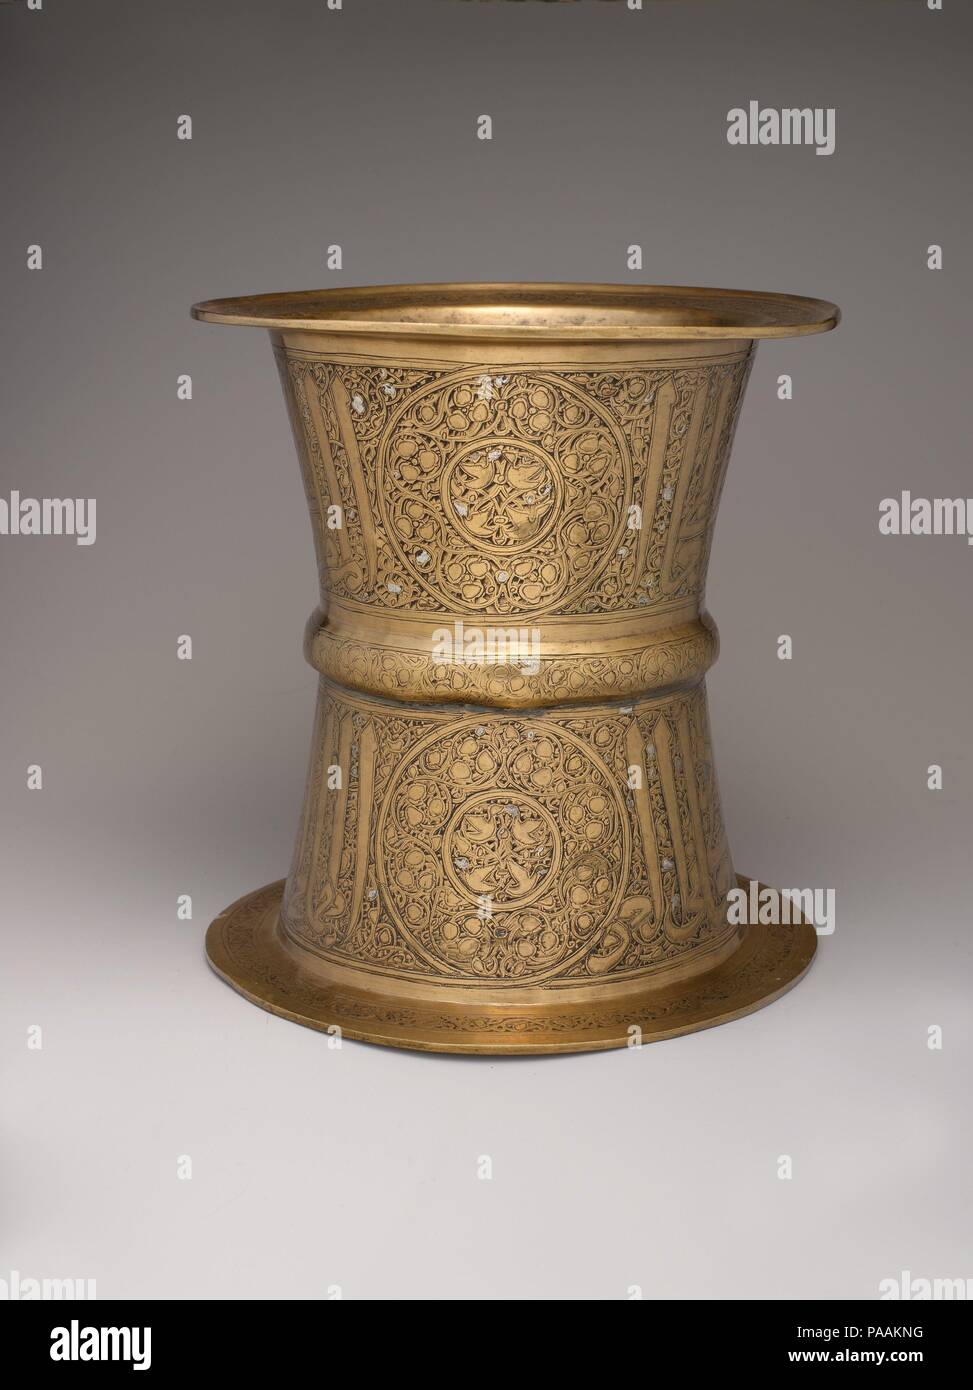 Tray Stand. Dimensions: H. 9 9/16 in. (24.3 cm)  Diam. (Rim) 9 3/16 in. (23.3 cm). Date: 14th century.  This tray stand exemplifies the work produced for highranking Mamluk patrons. The inscription's honorifics indicate that its owner was a governor under Sultan al-Nasir Muhammad (1310-41), during whose reign human and animal imagery lost favor, even on objects for secular use. A few groupings of small ducks are the only creatures depicted. Note on the central band and upper rim the inclusion of six-petalled rosettes, an emblem sometimes used by this sultan and his amirs. Museum: Metropolitan  Stock Photo